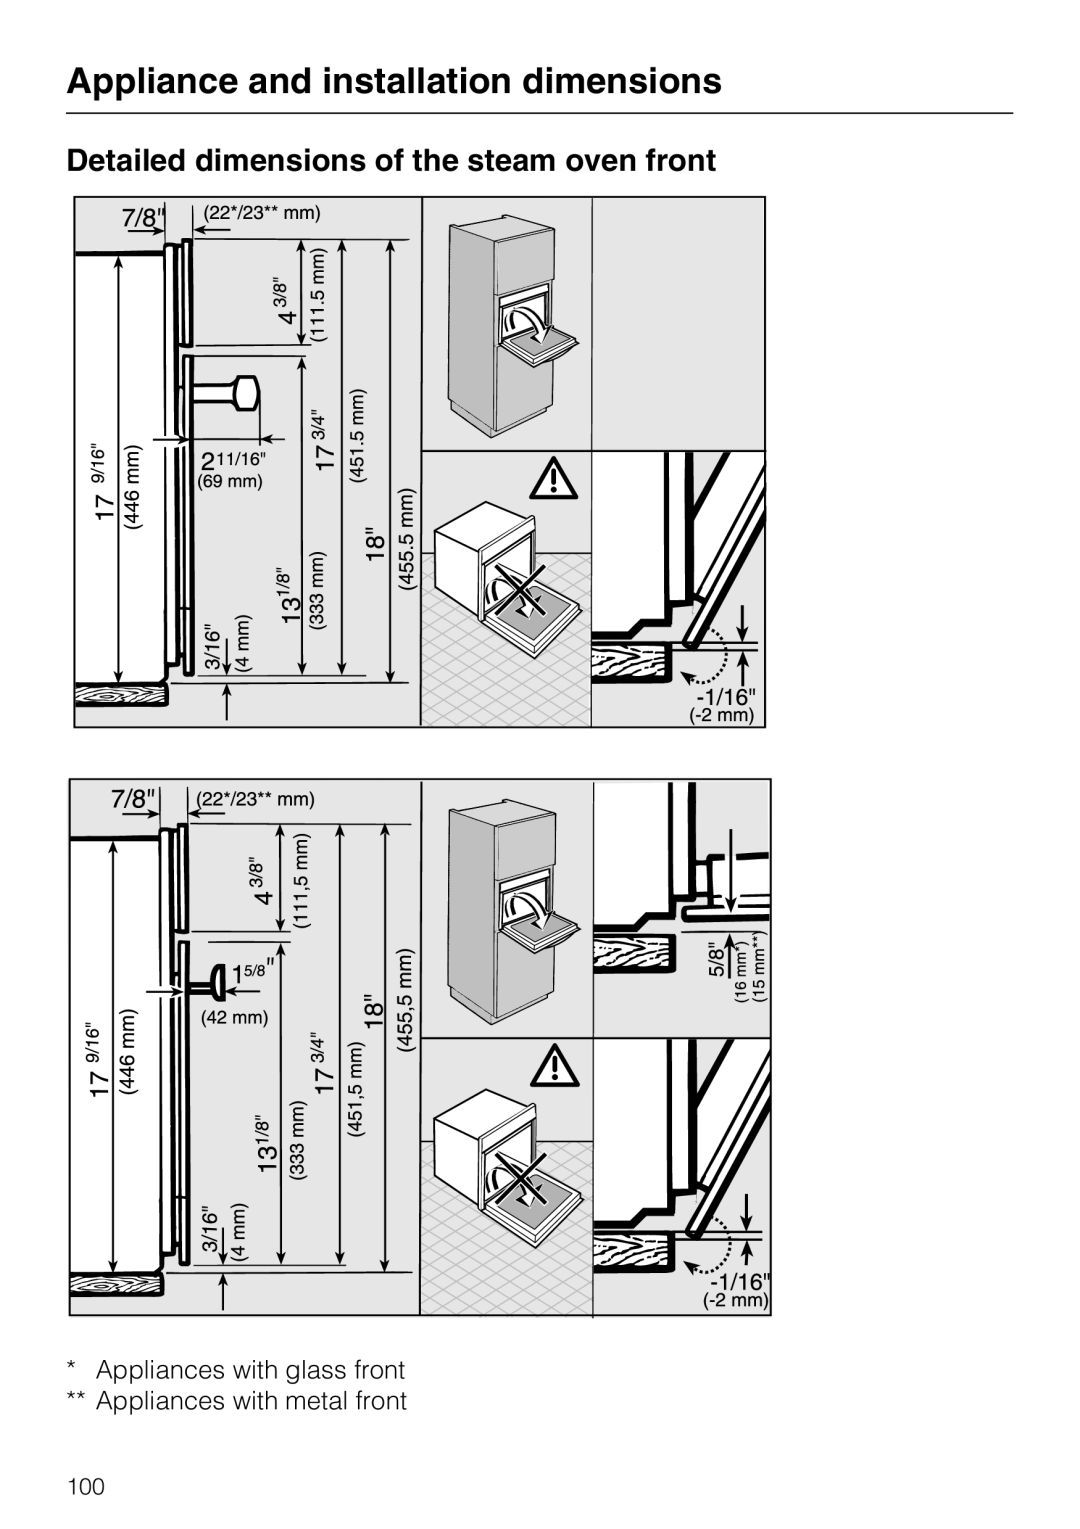 Miele 09 800 830 Detailed dimensions of the steam oven front, Appliance and installation dimensions 